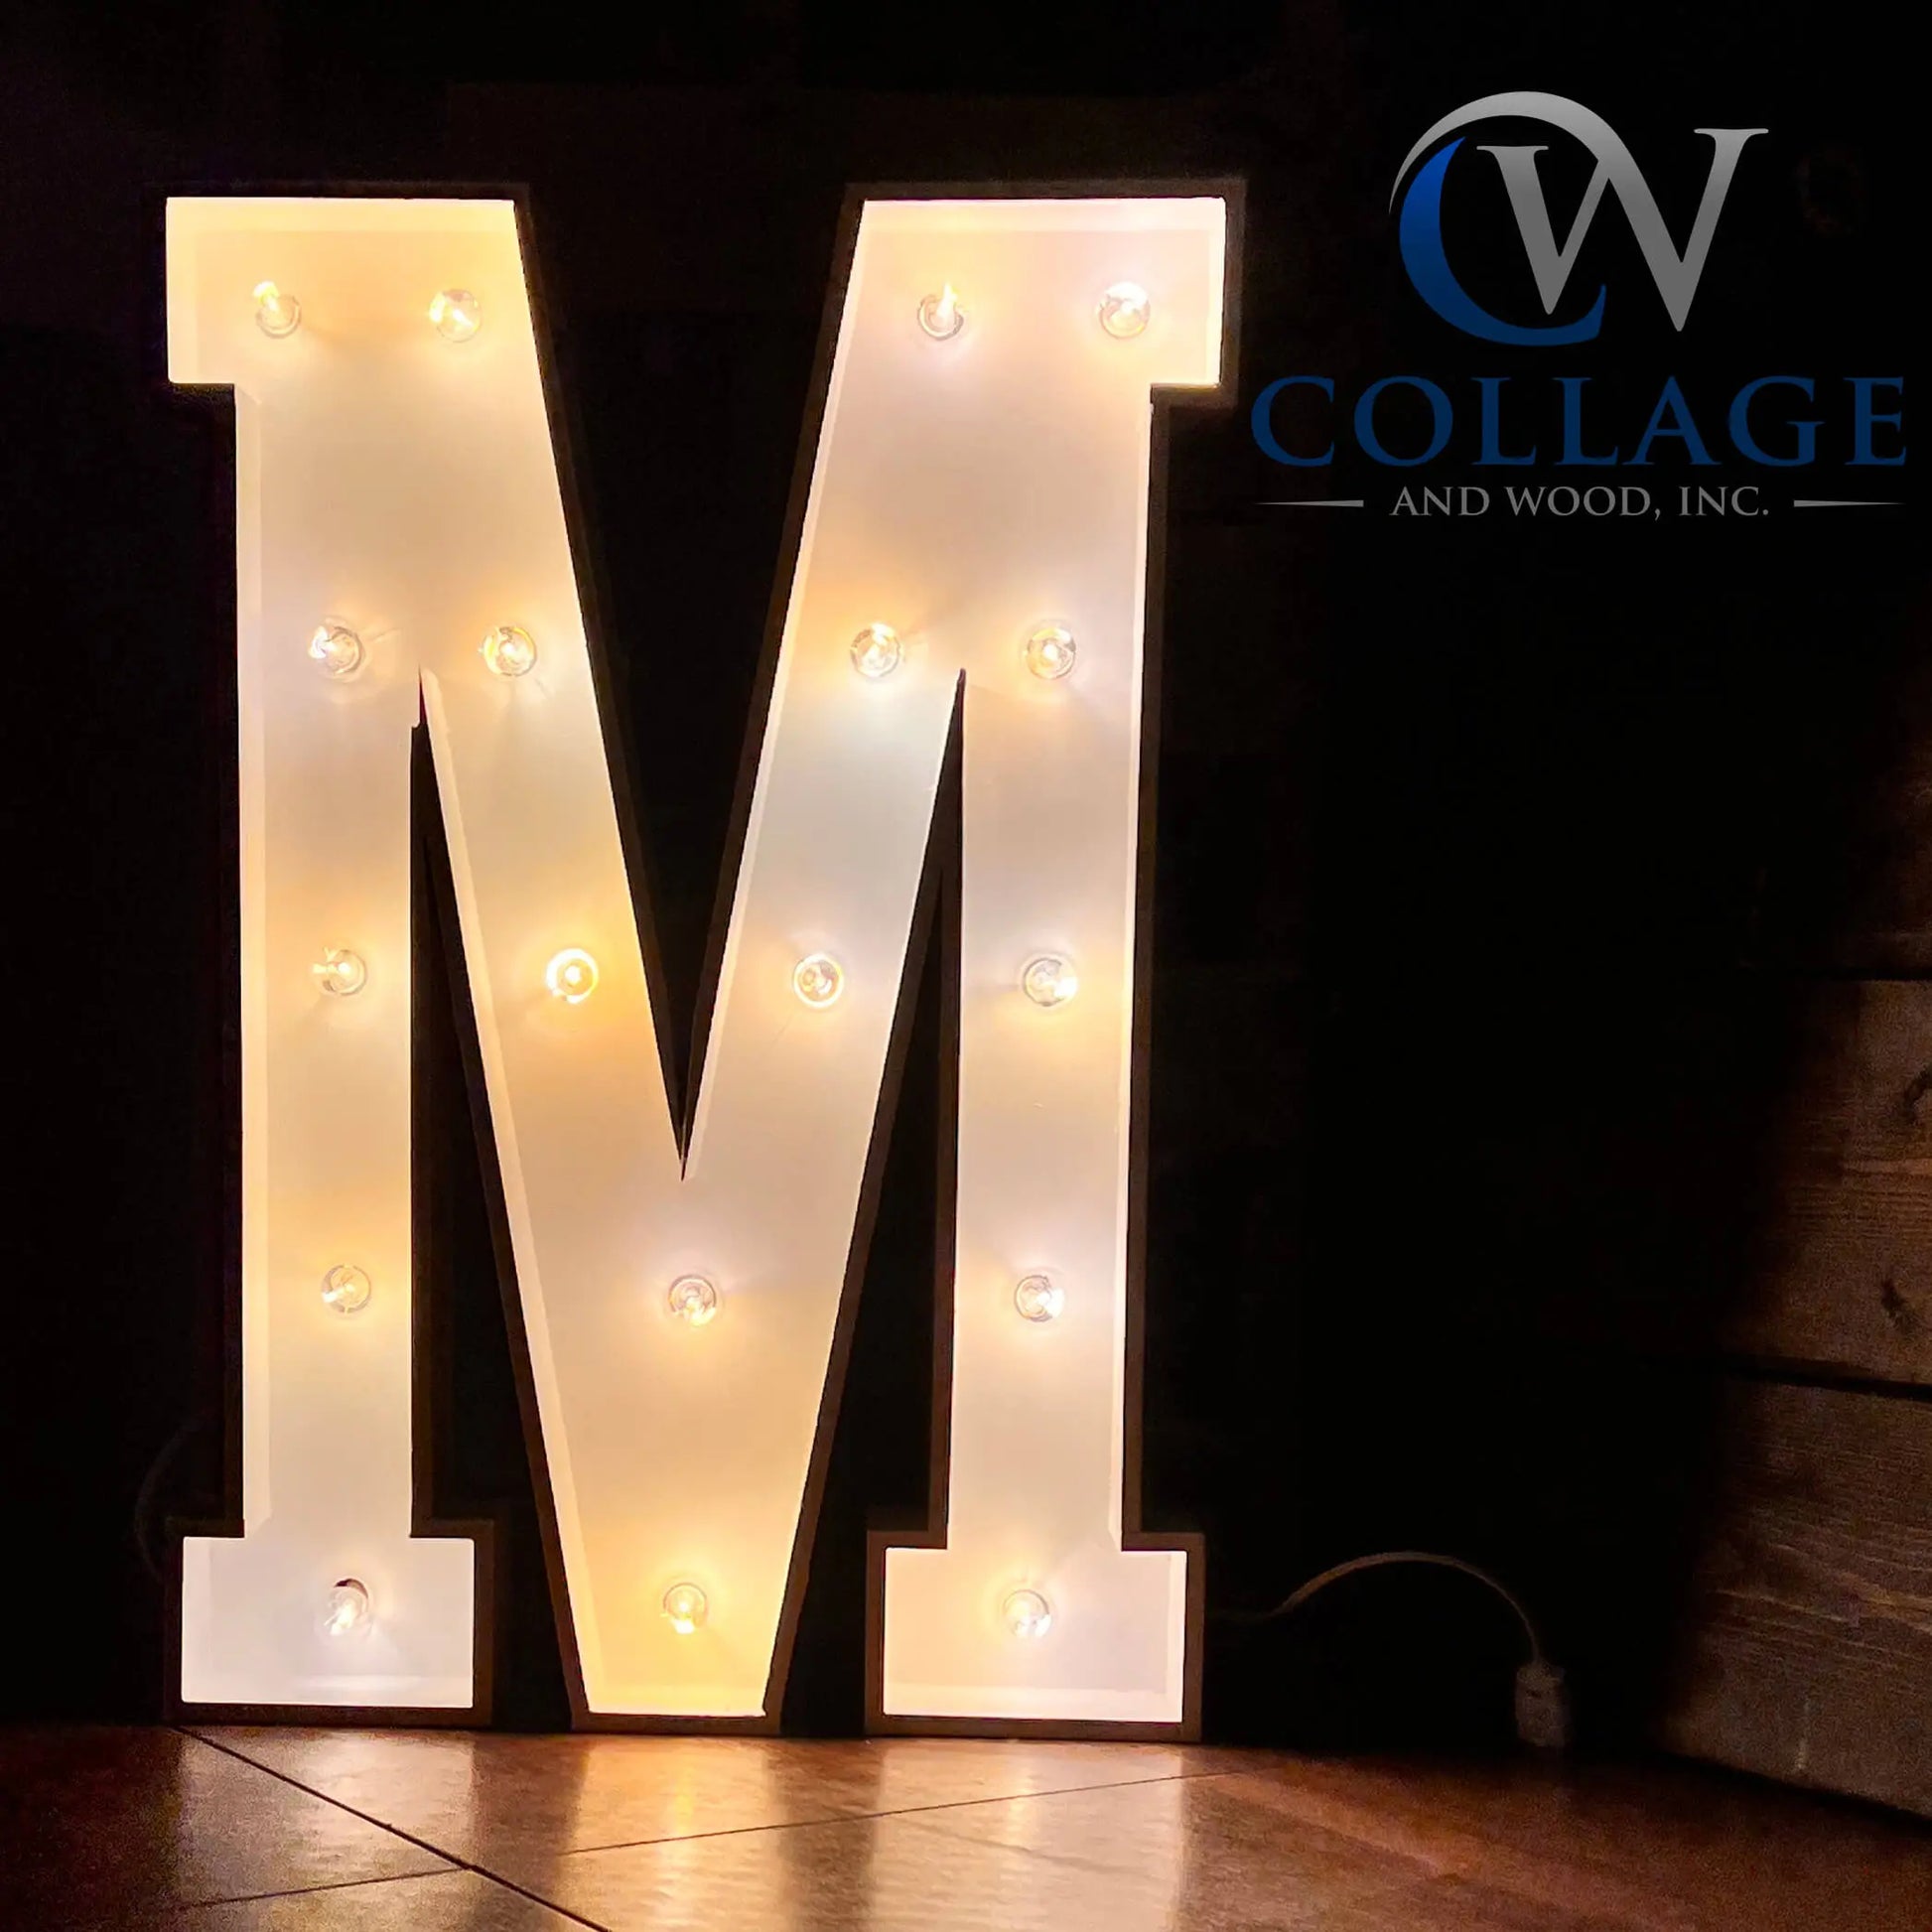 Majestic 3-foot tall wooden marquee letter M, elegantly dressed in white, adorned with brilliant battery-powered LED lights.